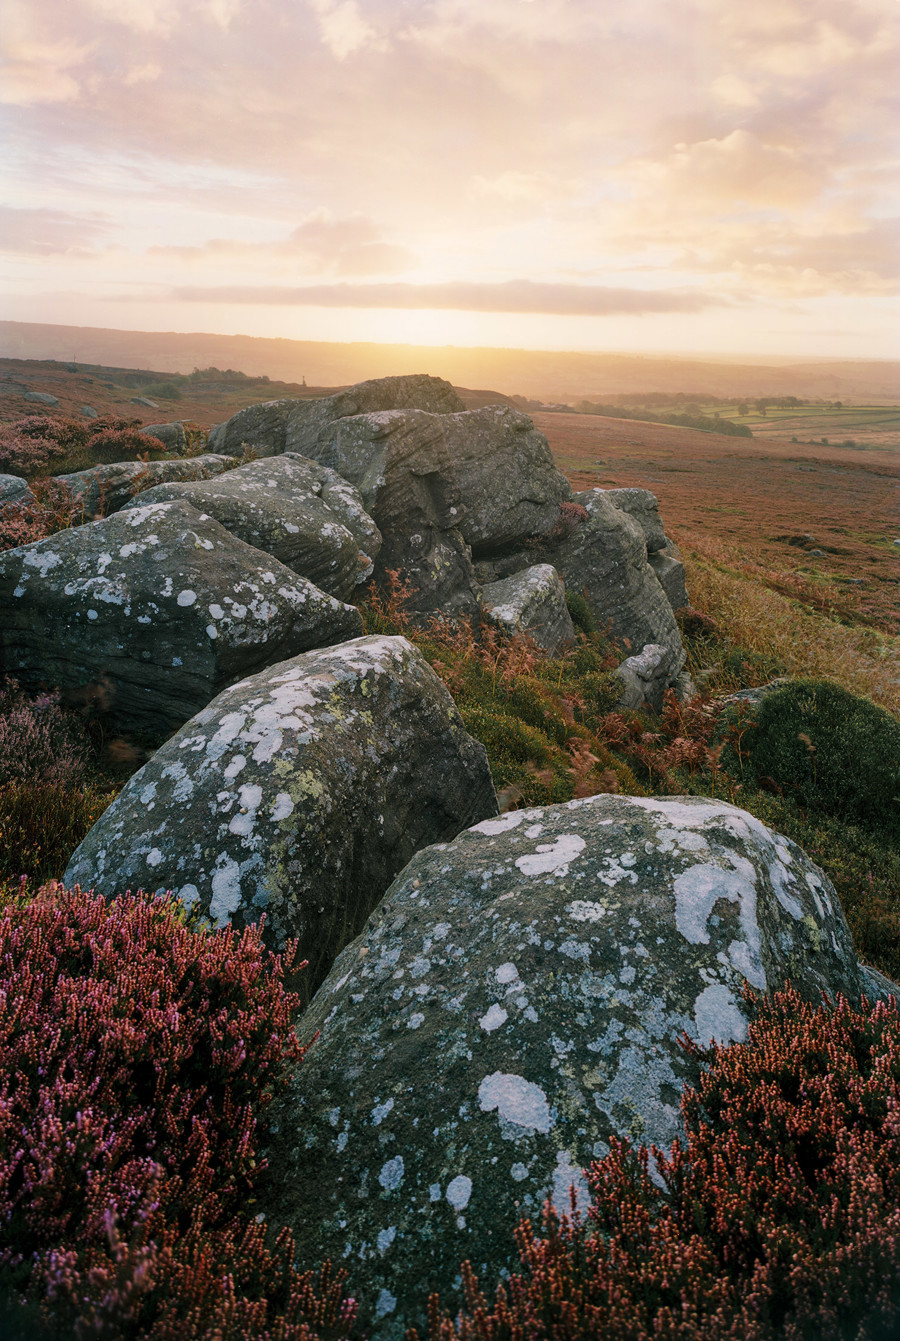 A gentle sunrise casts warm light over North Yorkshire moorland, highlighting rugged rocks with lichen patterns and vibrant heather clusters. In the distance, soft, rolling hills under a gentle sky meet the horizon. a group of people on a rocky hill